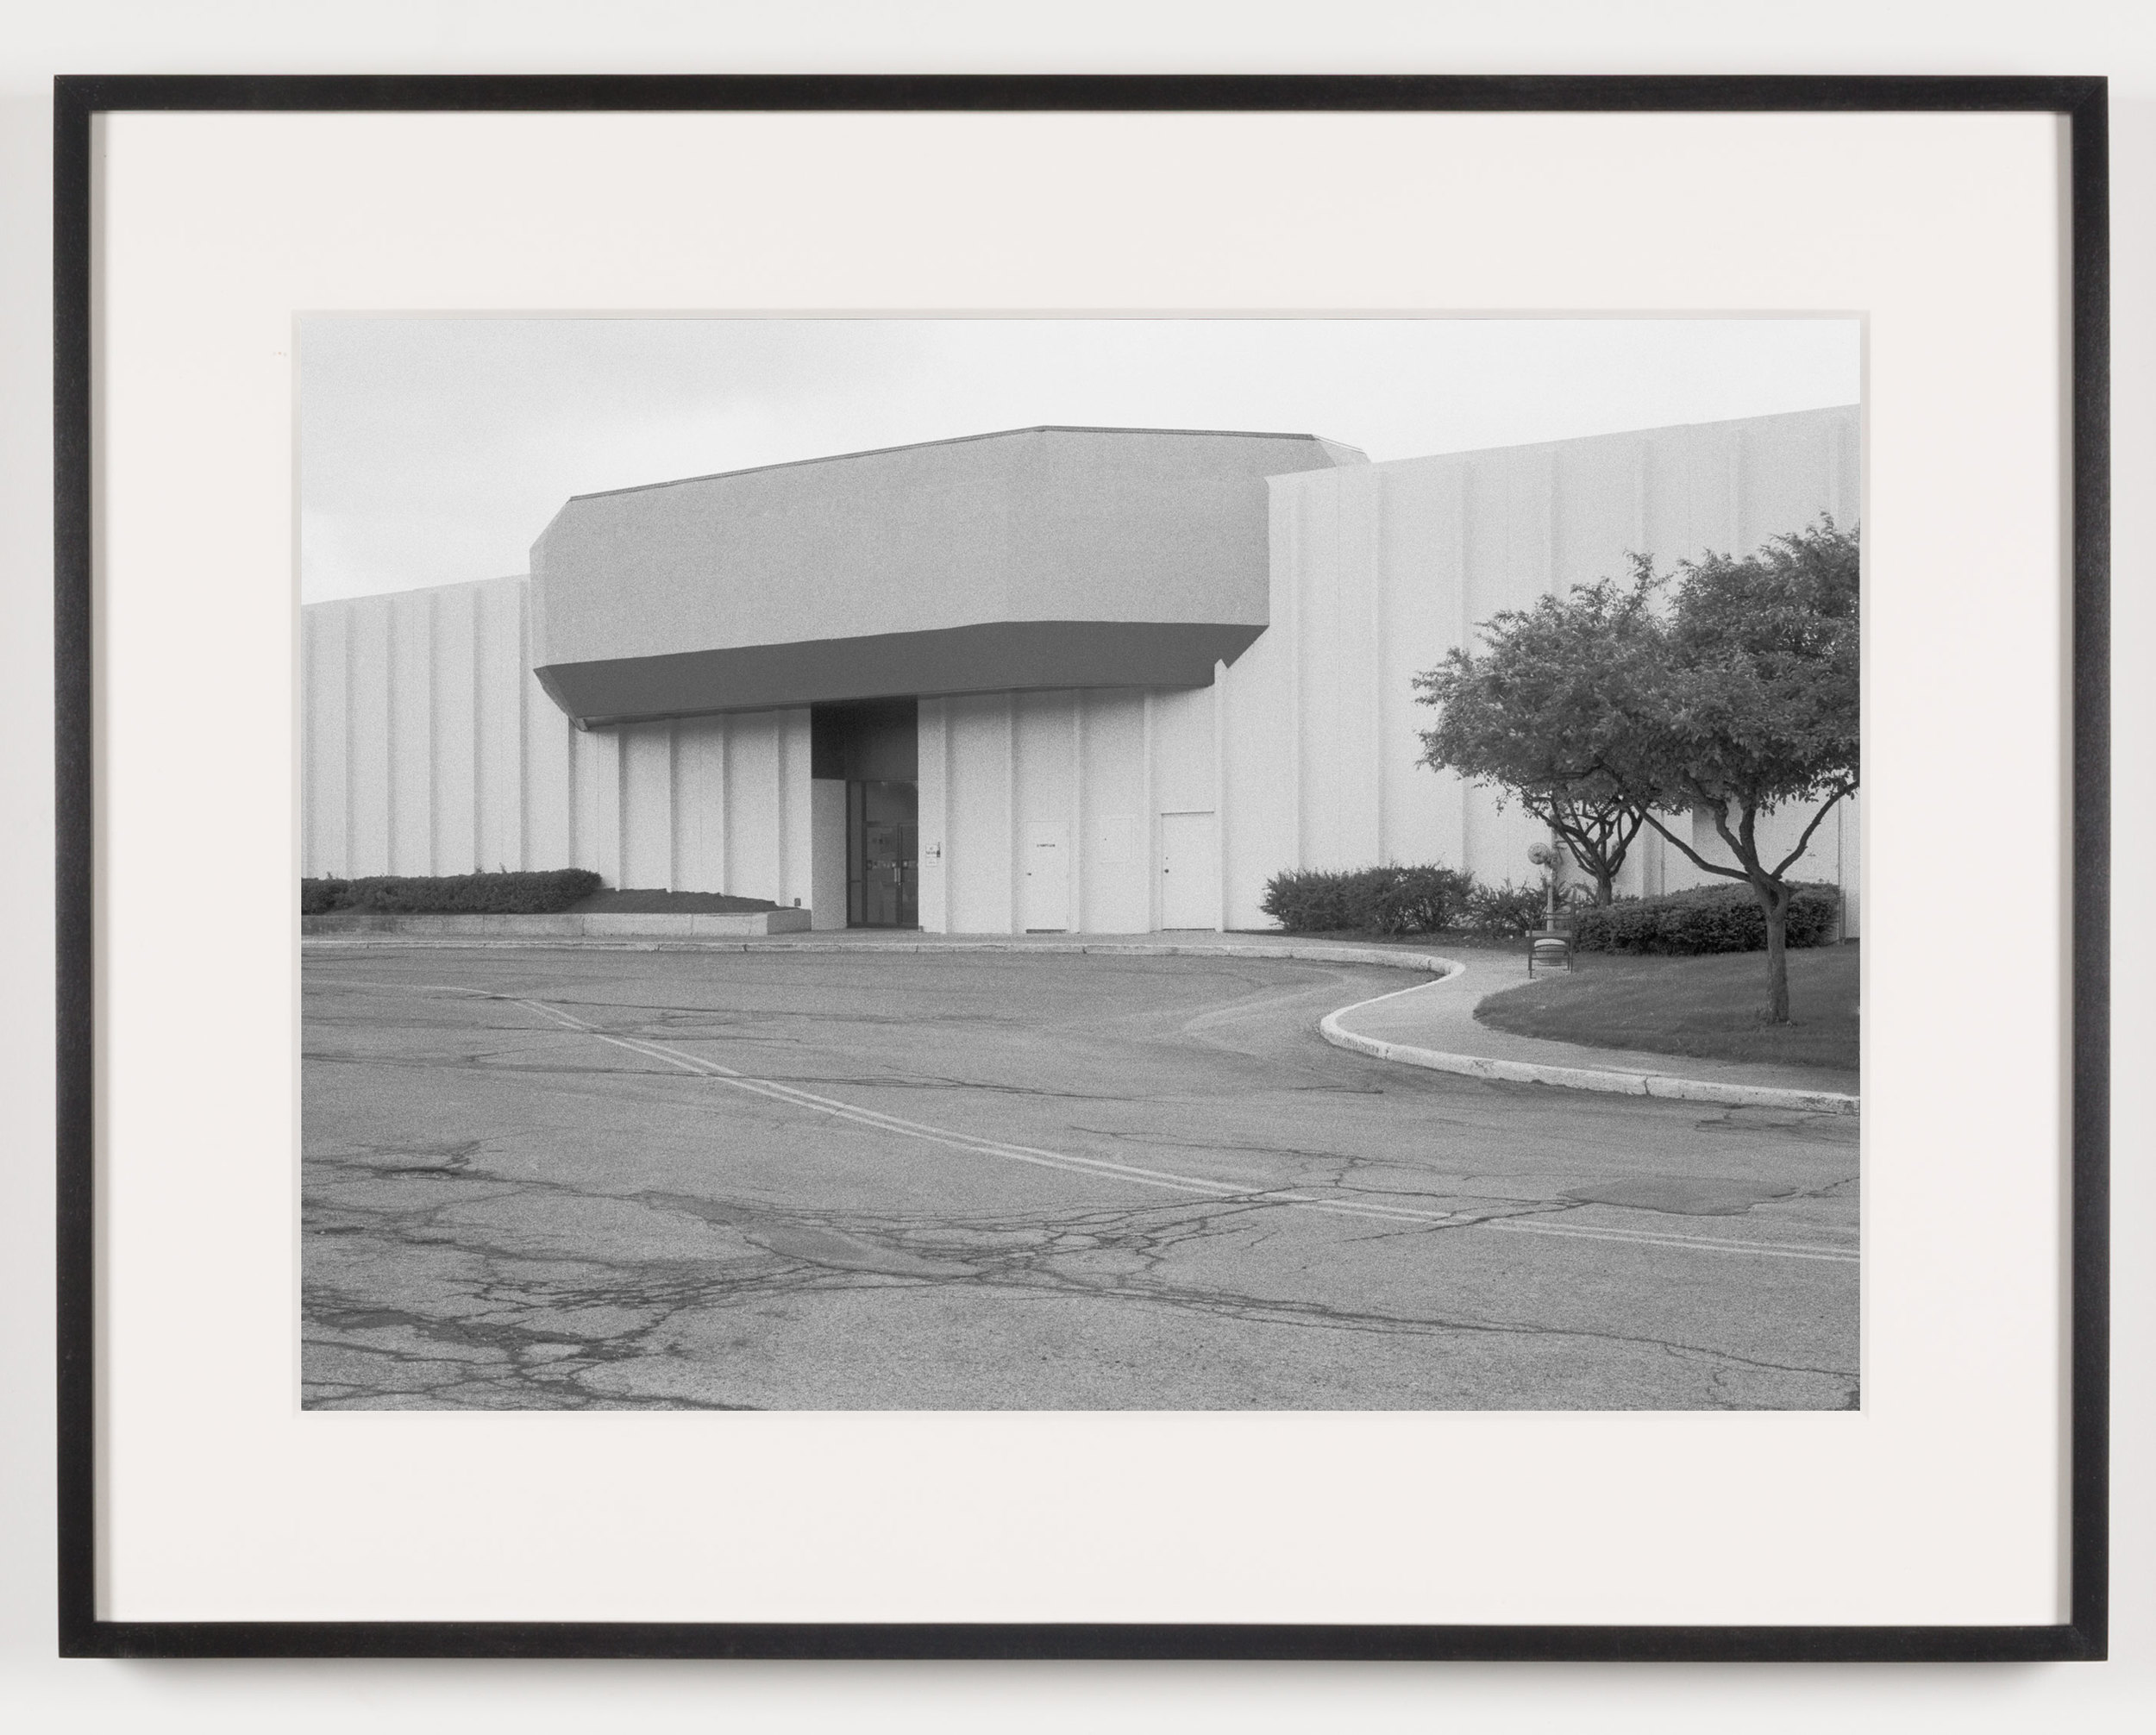   Midway Mall (View of Exterior, 'Sears'), Elyria, OH, Est. 1965    2011   Epson Ultrachrome K3 archival ink jet print on Hahnemühle Photo Rag paper  21 5/8 x 28 1/8 inches   American Passages, 2001–2011     